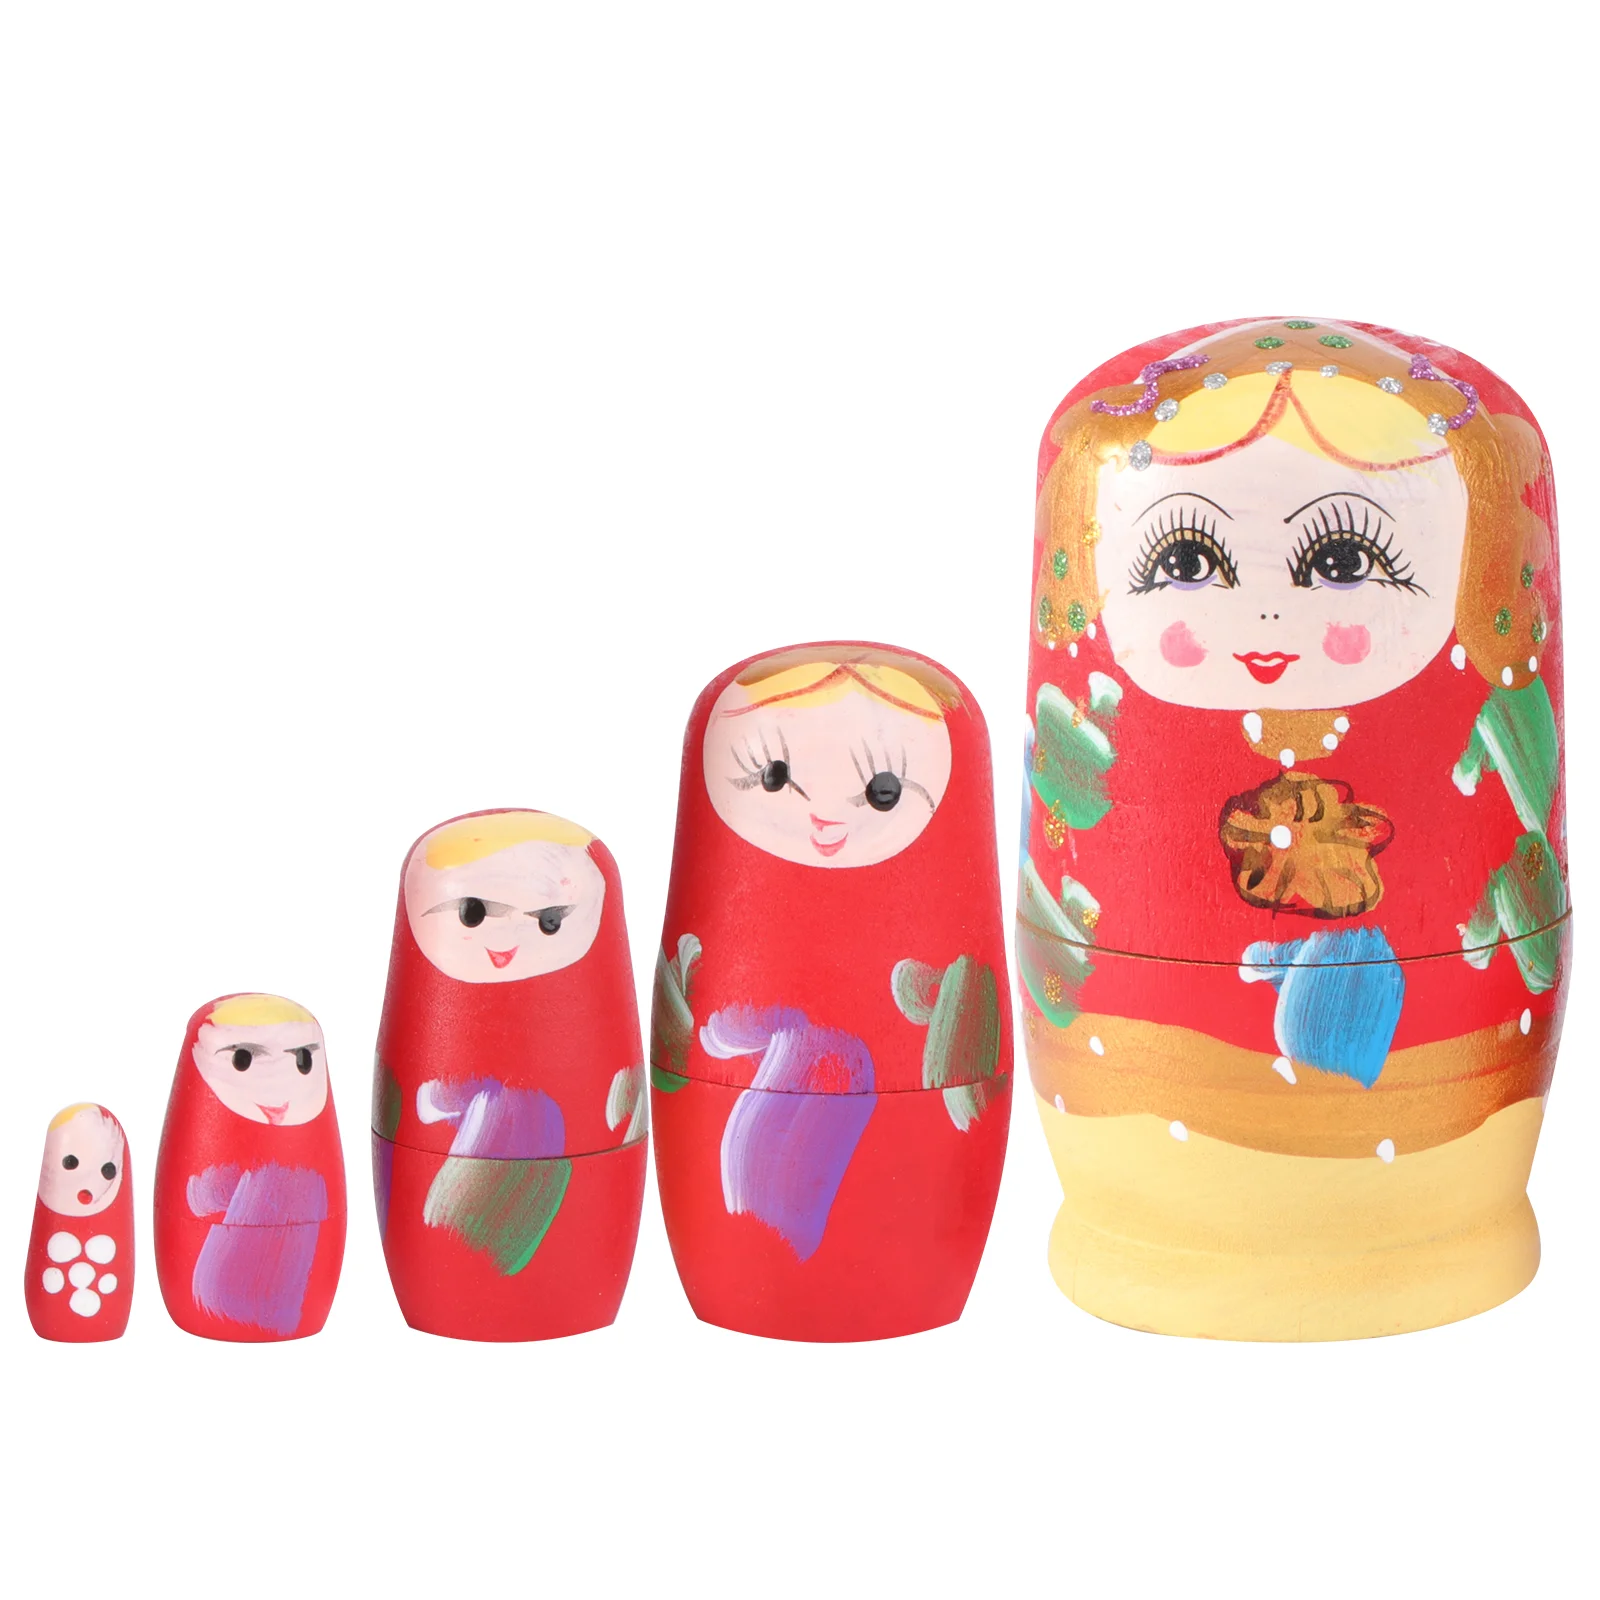 

Nesting Russian Wooden Toy Stacking Kids Nested Toys Christmas Painted Girl Set Wood Traditional Kid Babushka Toddlers Figurines